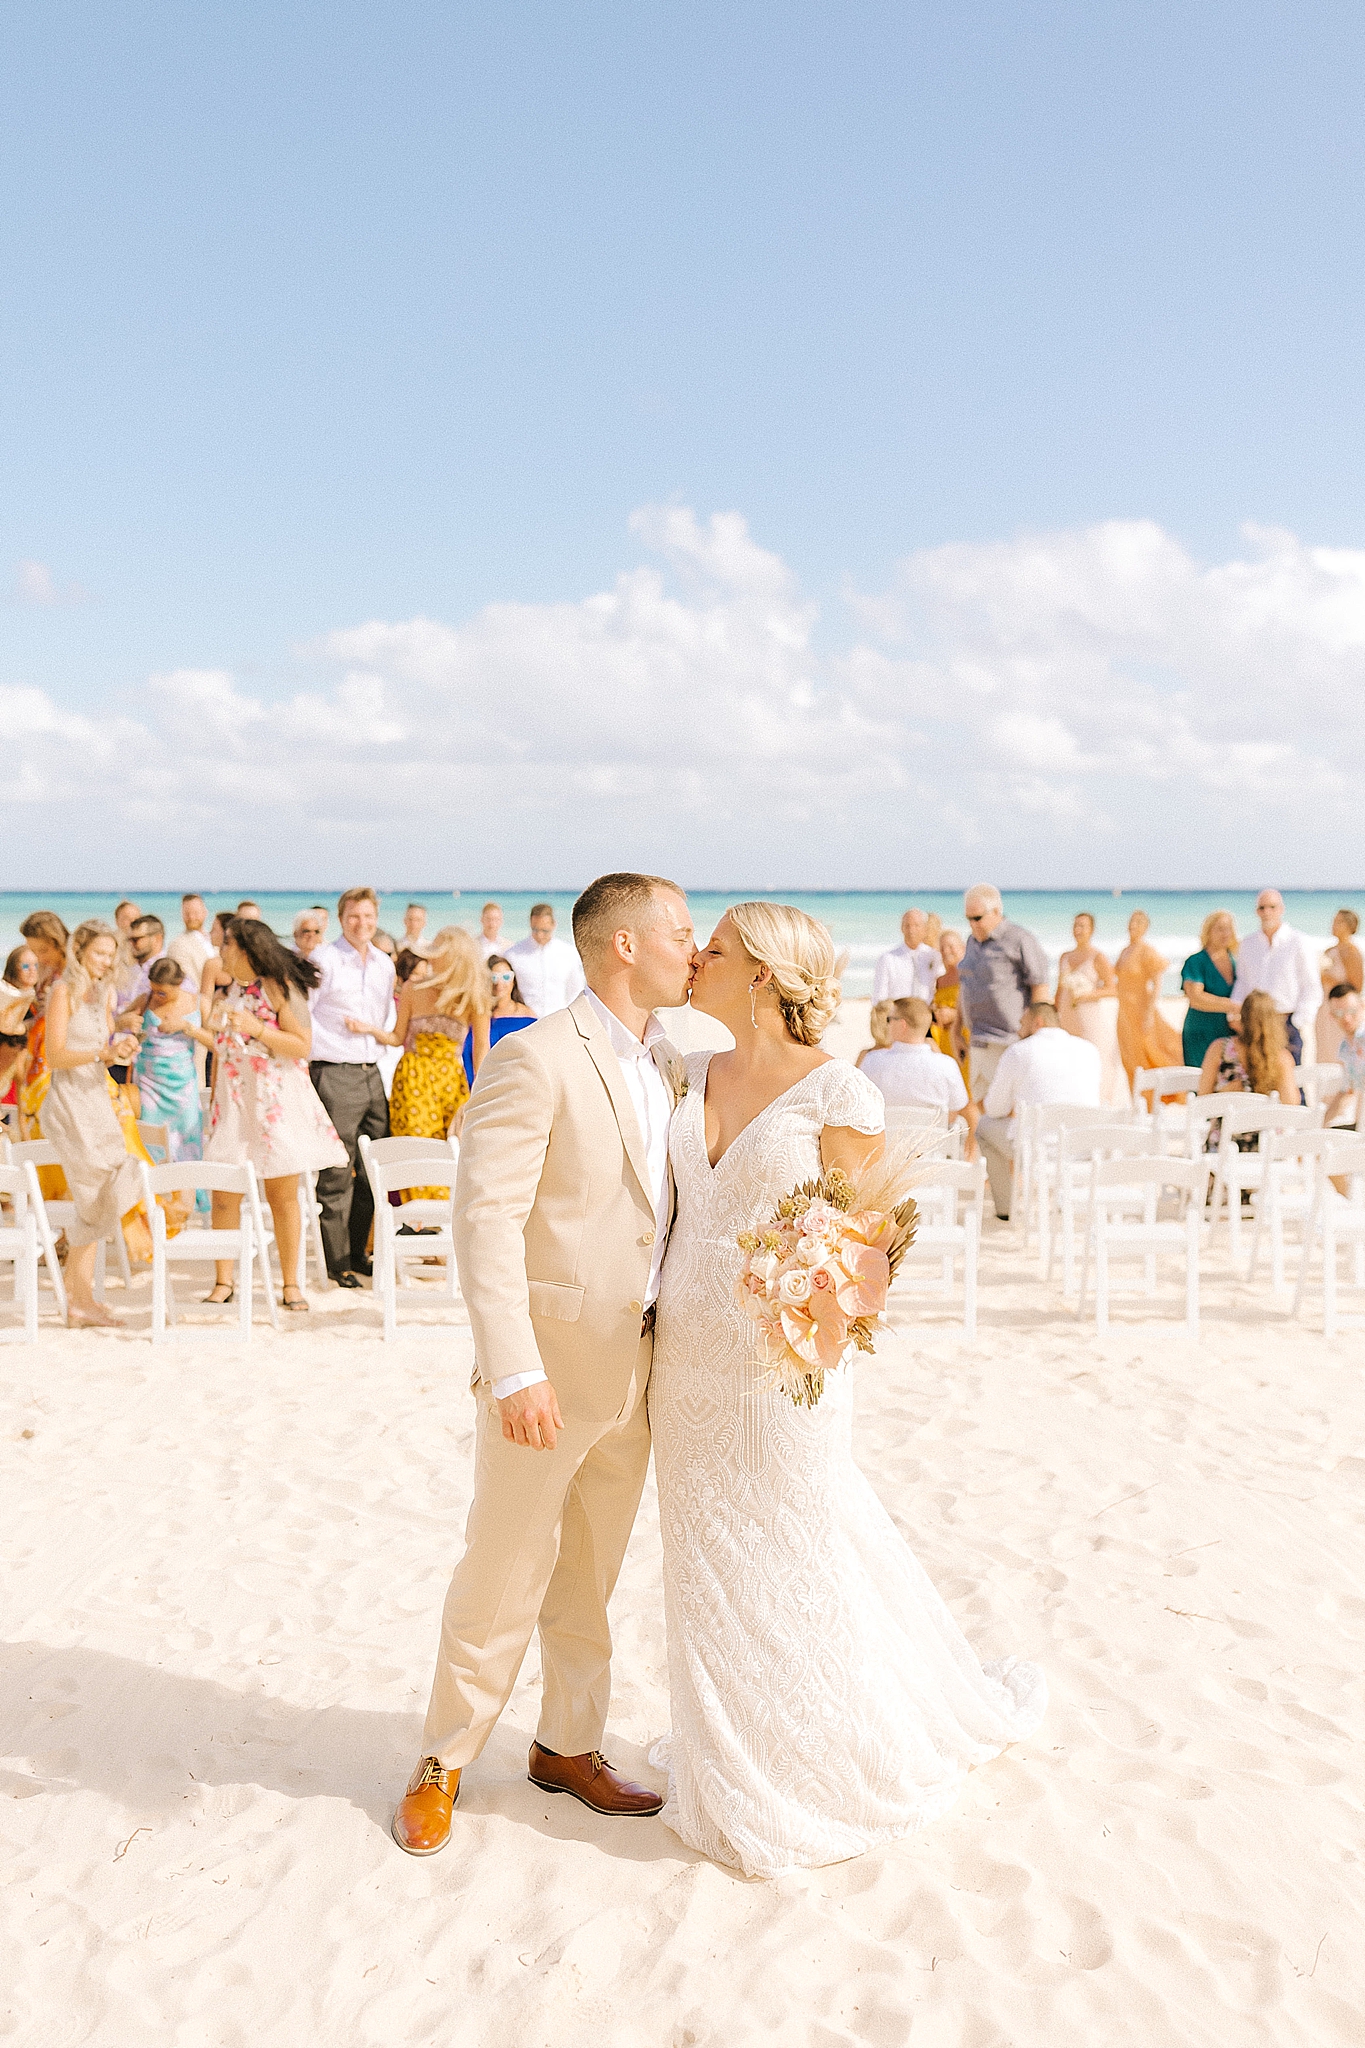 newlyweds kiss with guests behind them after destination wedding ceremony on the beach in Playa Del Carmen